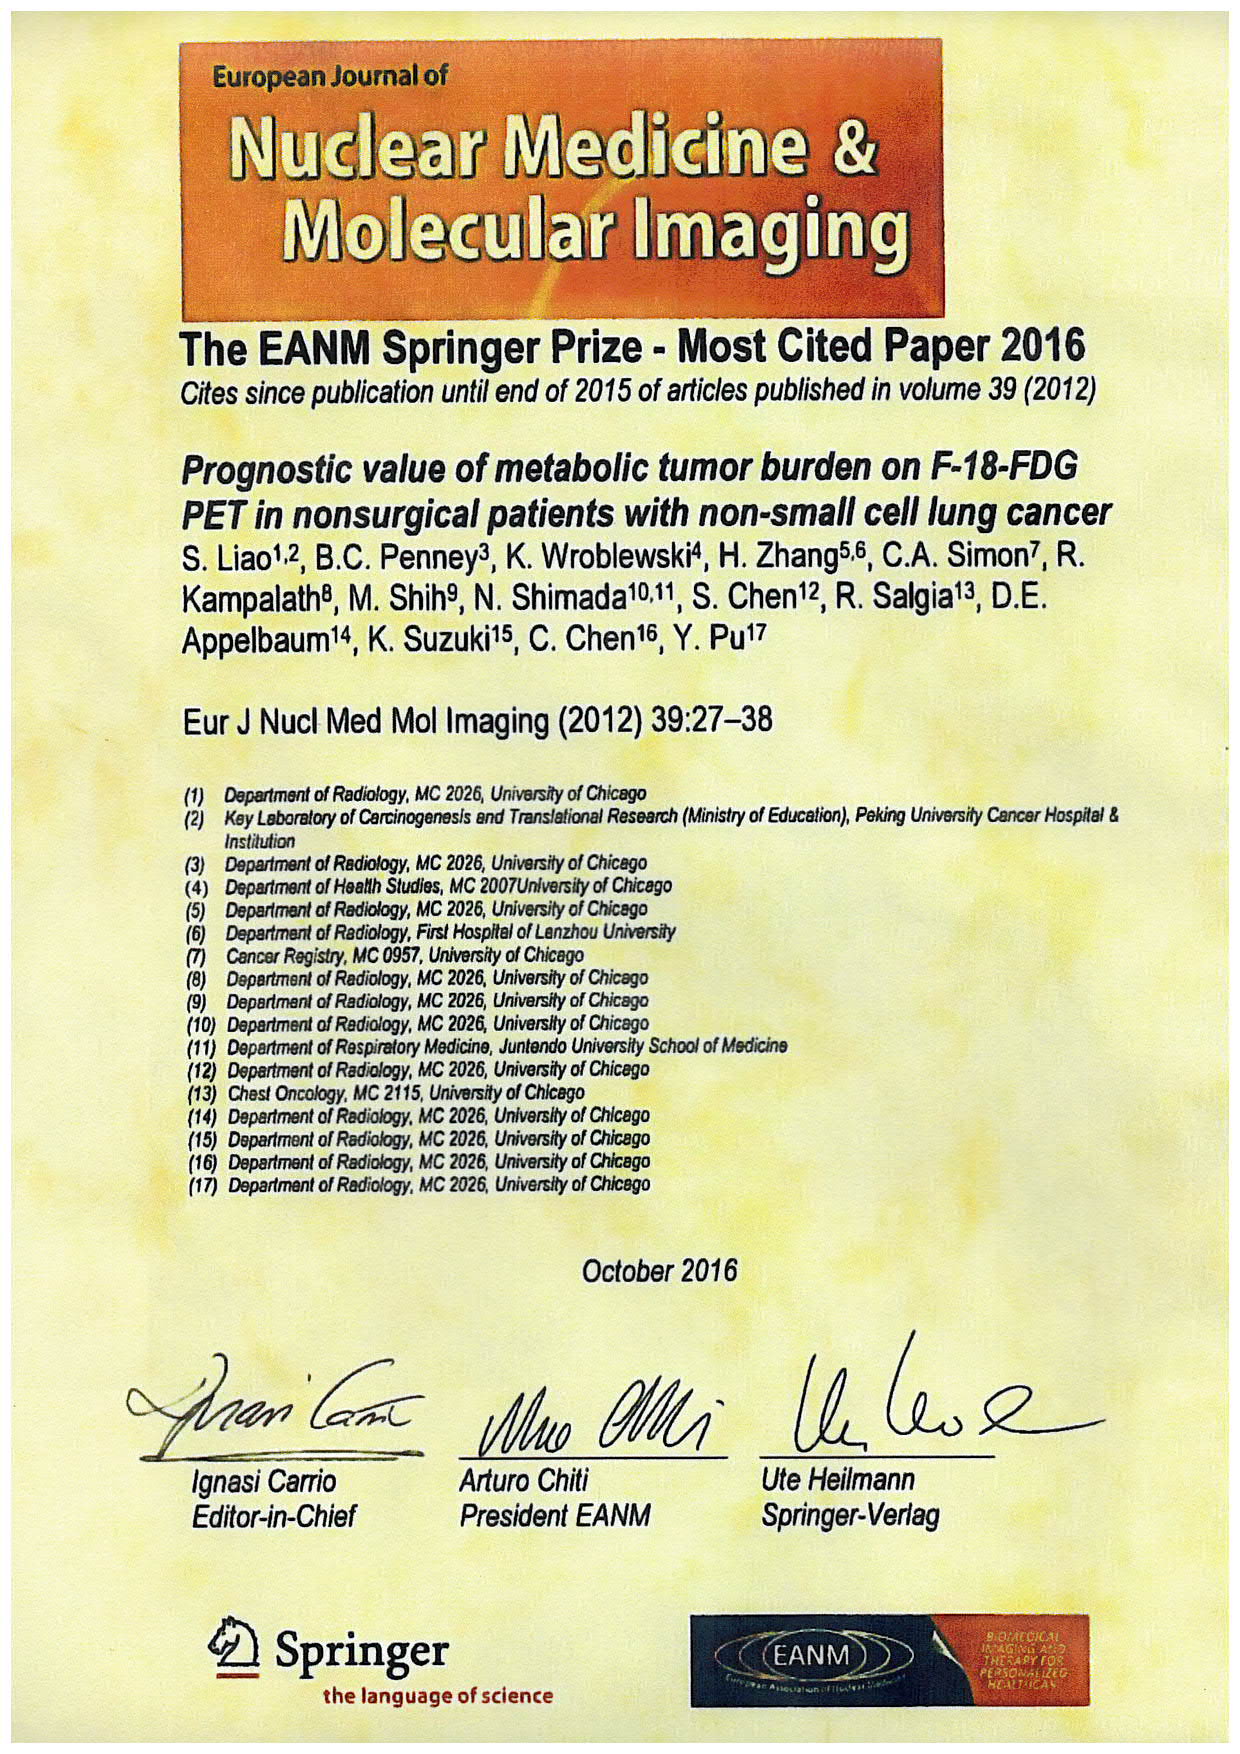 Dr. Suzuki and collaborators have received The EANM Springer-Nature Award 2016